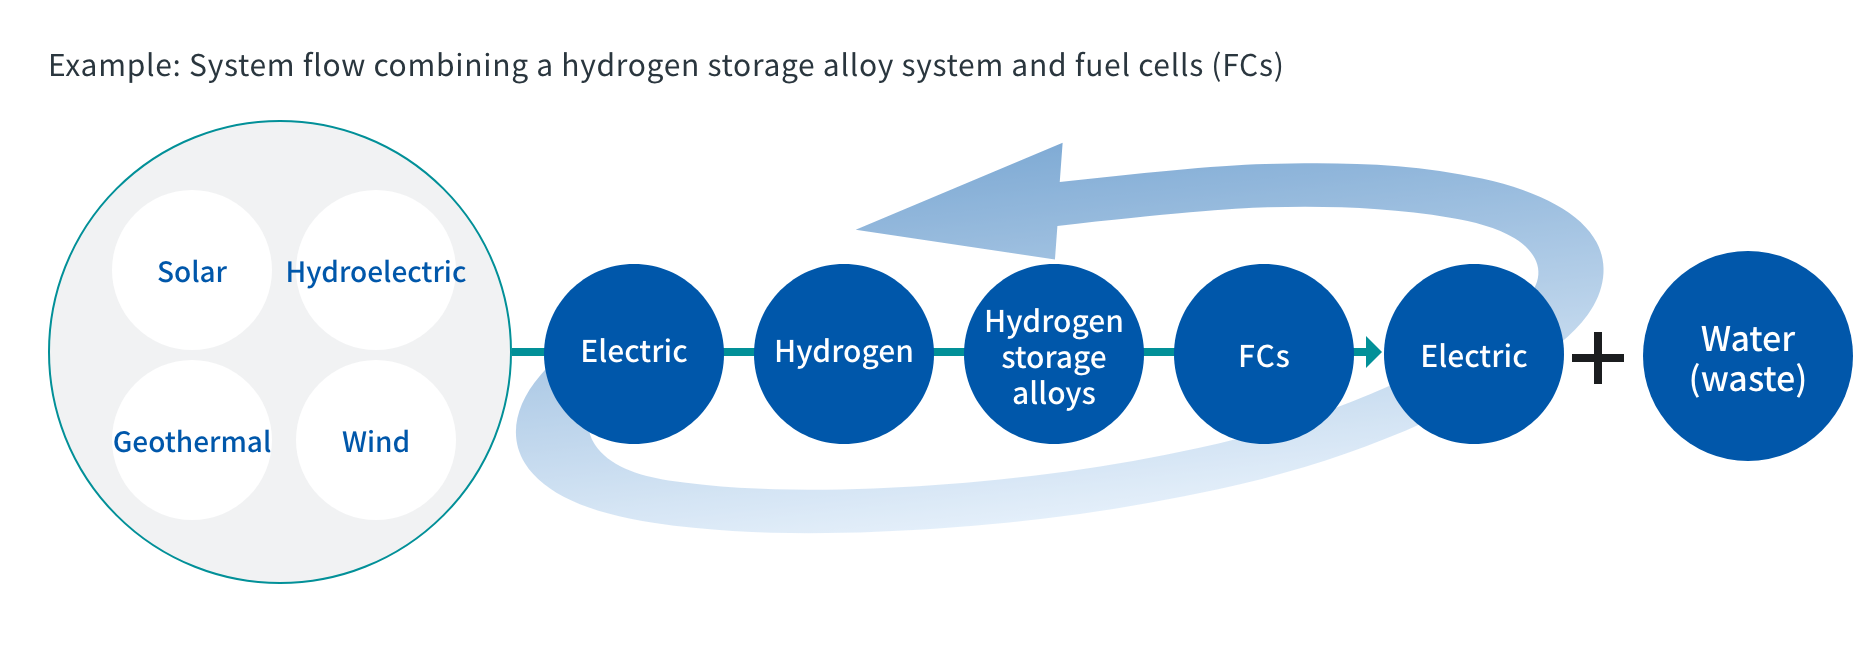 Example: System flow combining a hydrogen storage alloy system and fuel cells (FCs)